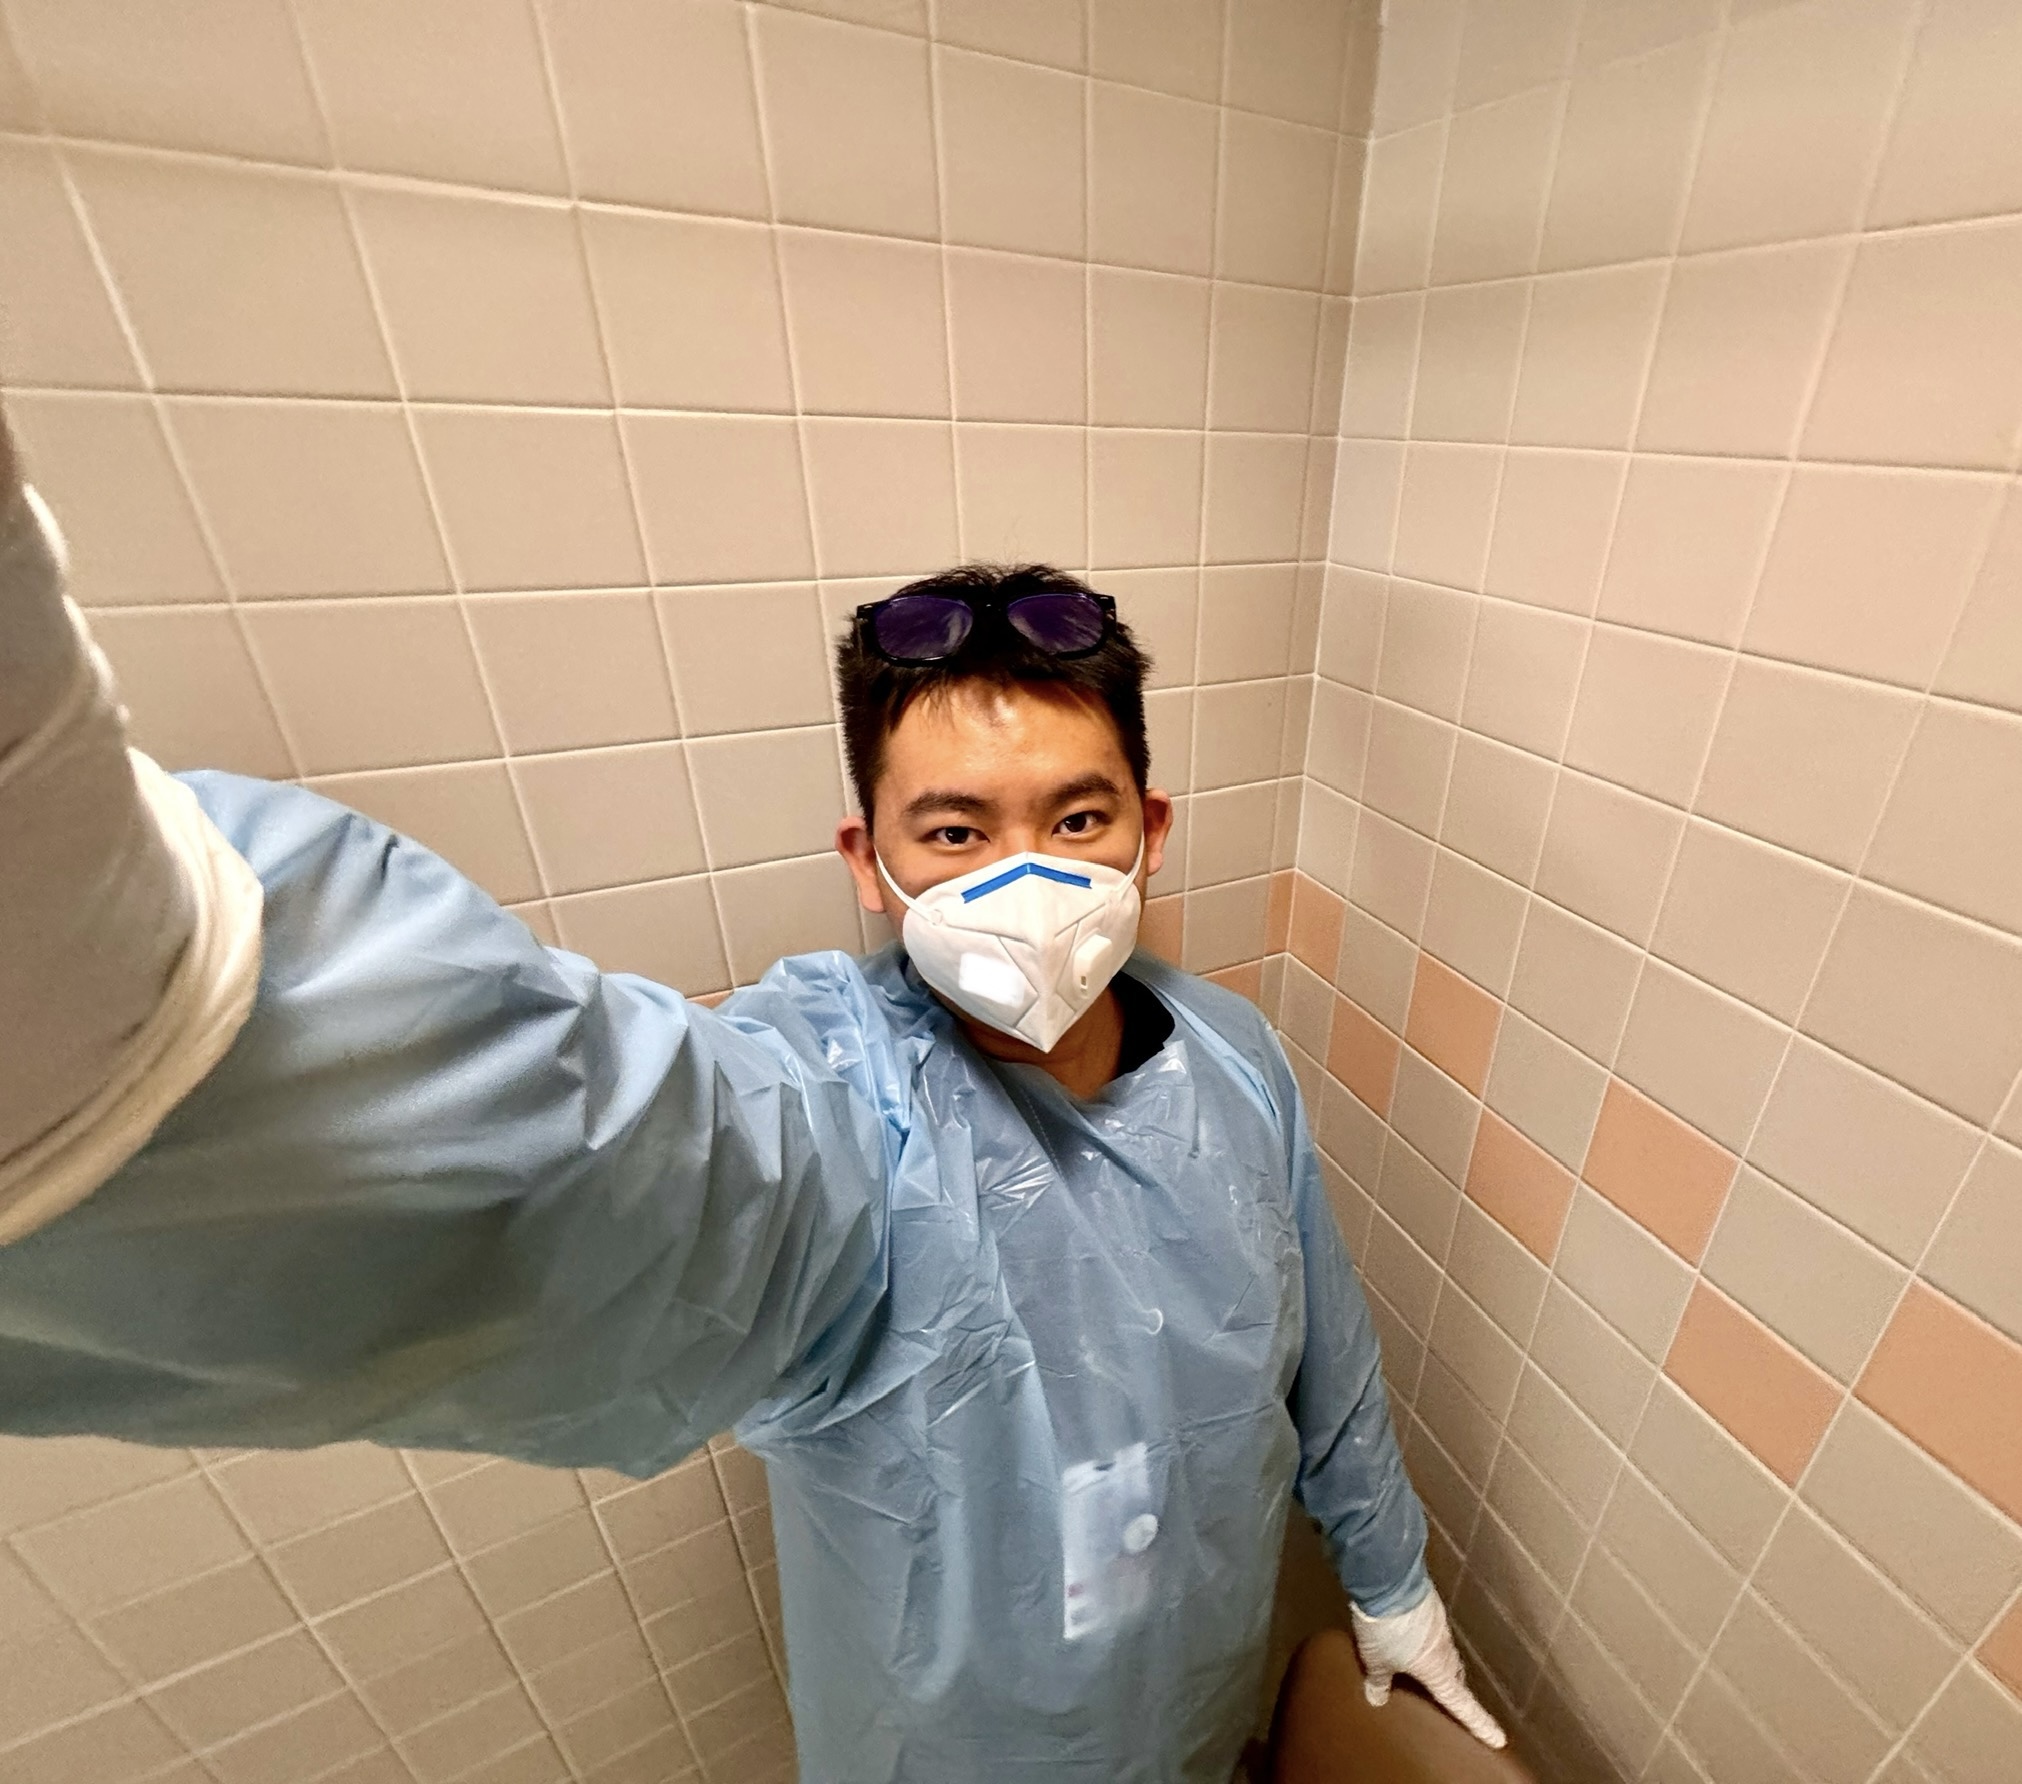 The author, a premed student, wears a protective gown and an N95 mask at a hospital.